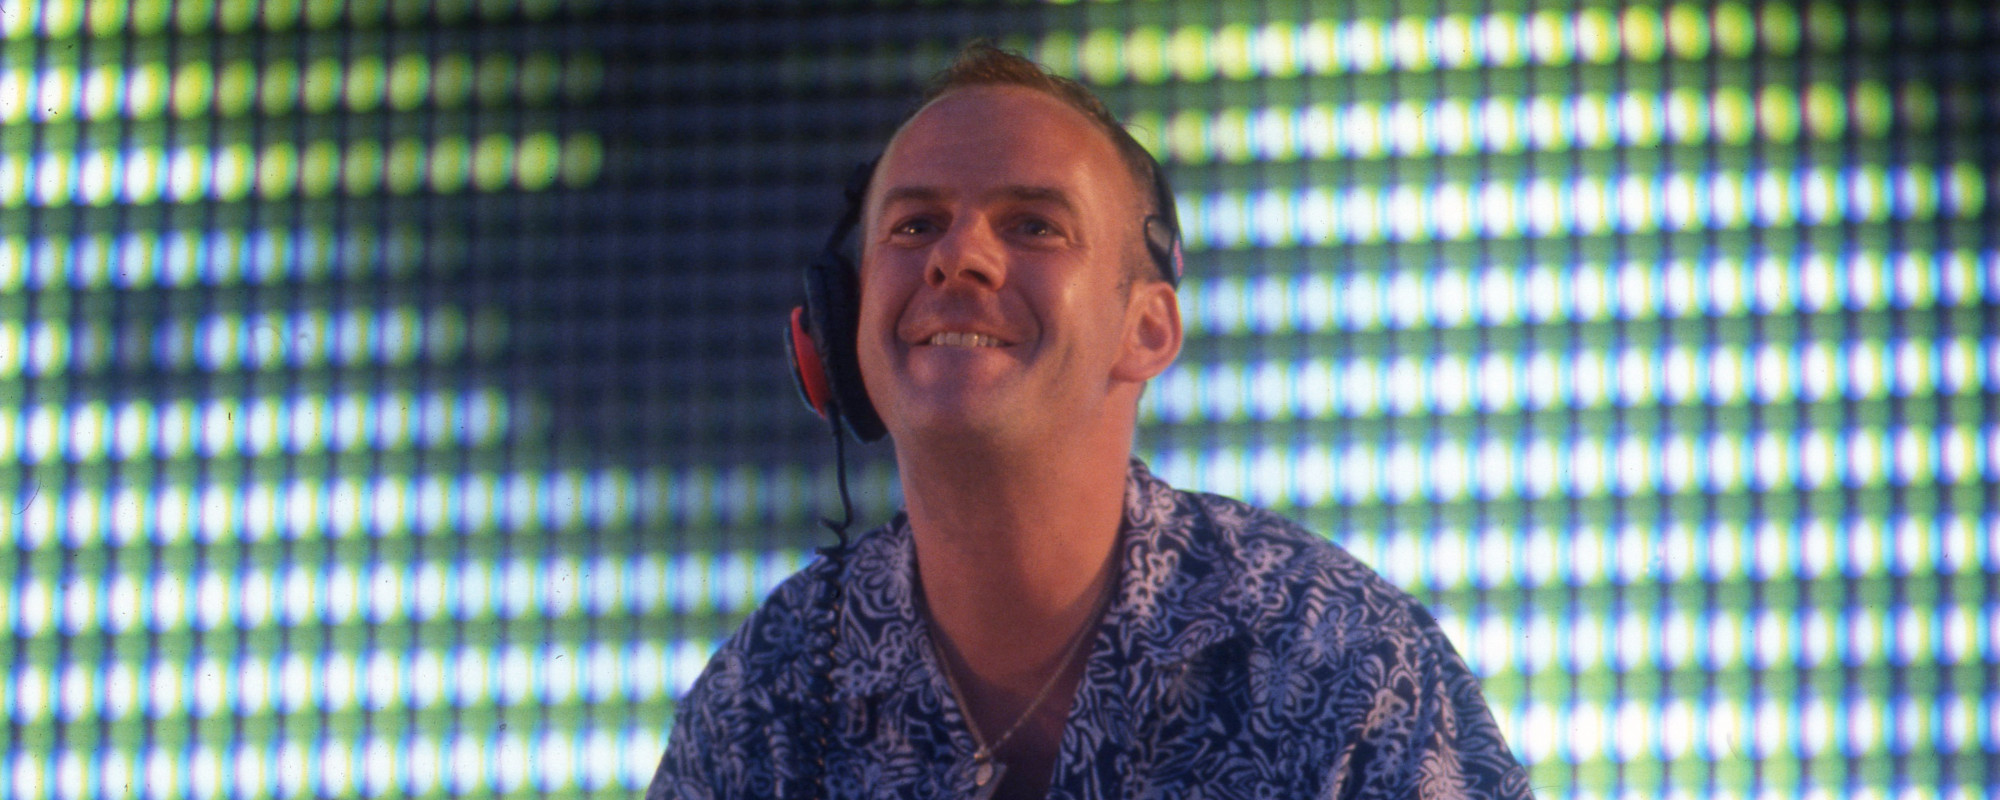 Fatboy Slim on Why He Regrets Meeting David Bowie: “I Was Just Deflated”